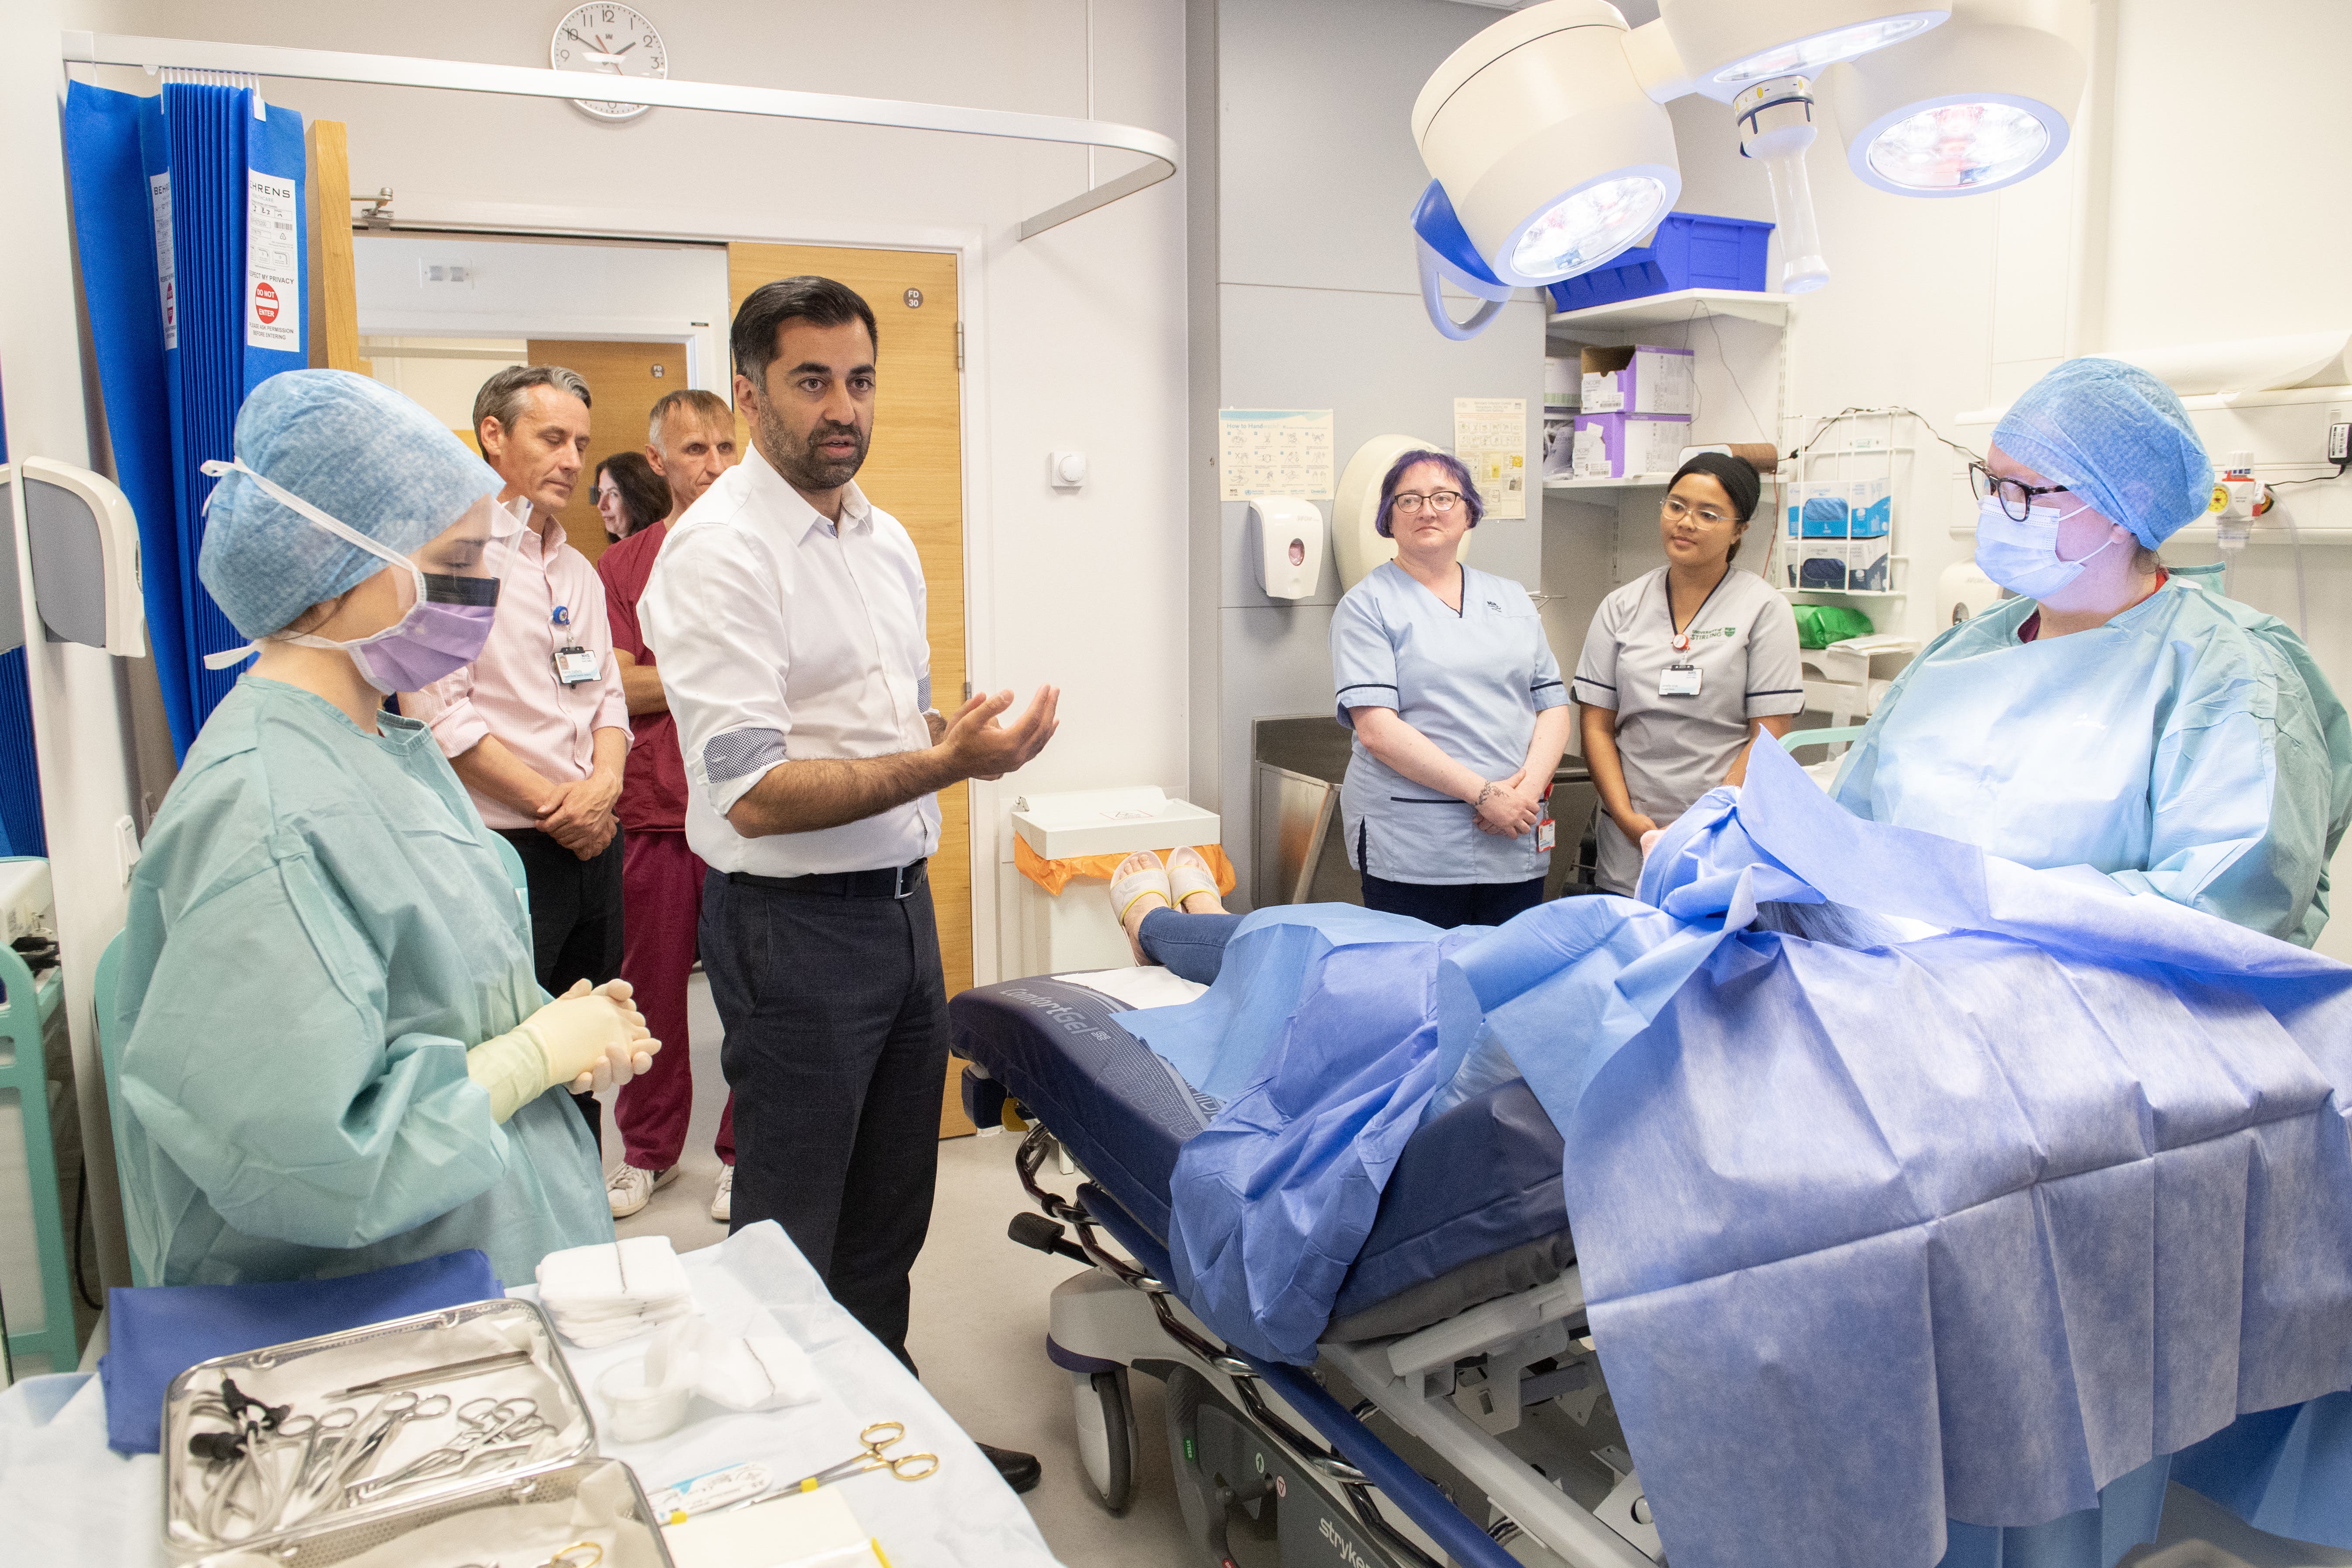 First Minister Humza Yousaf meets patient Catherine Esplin during a visit to NHS Forth Valley Royal Hospital in Larbert (Lesley Martin/PA)